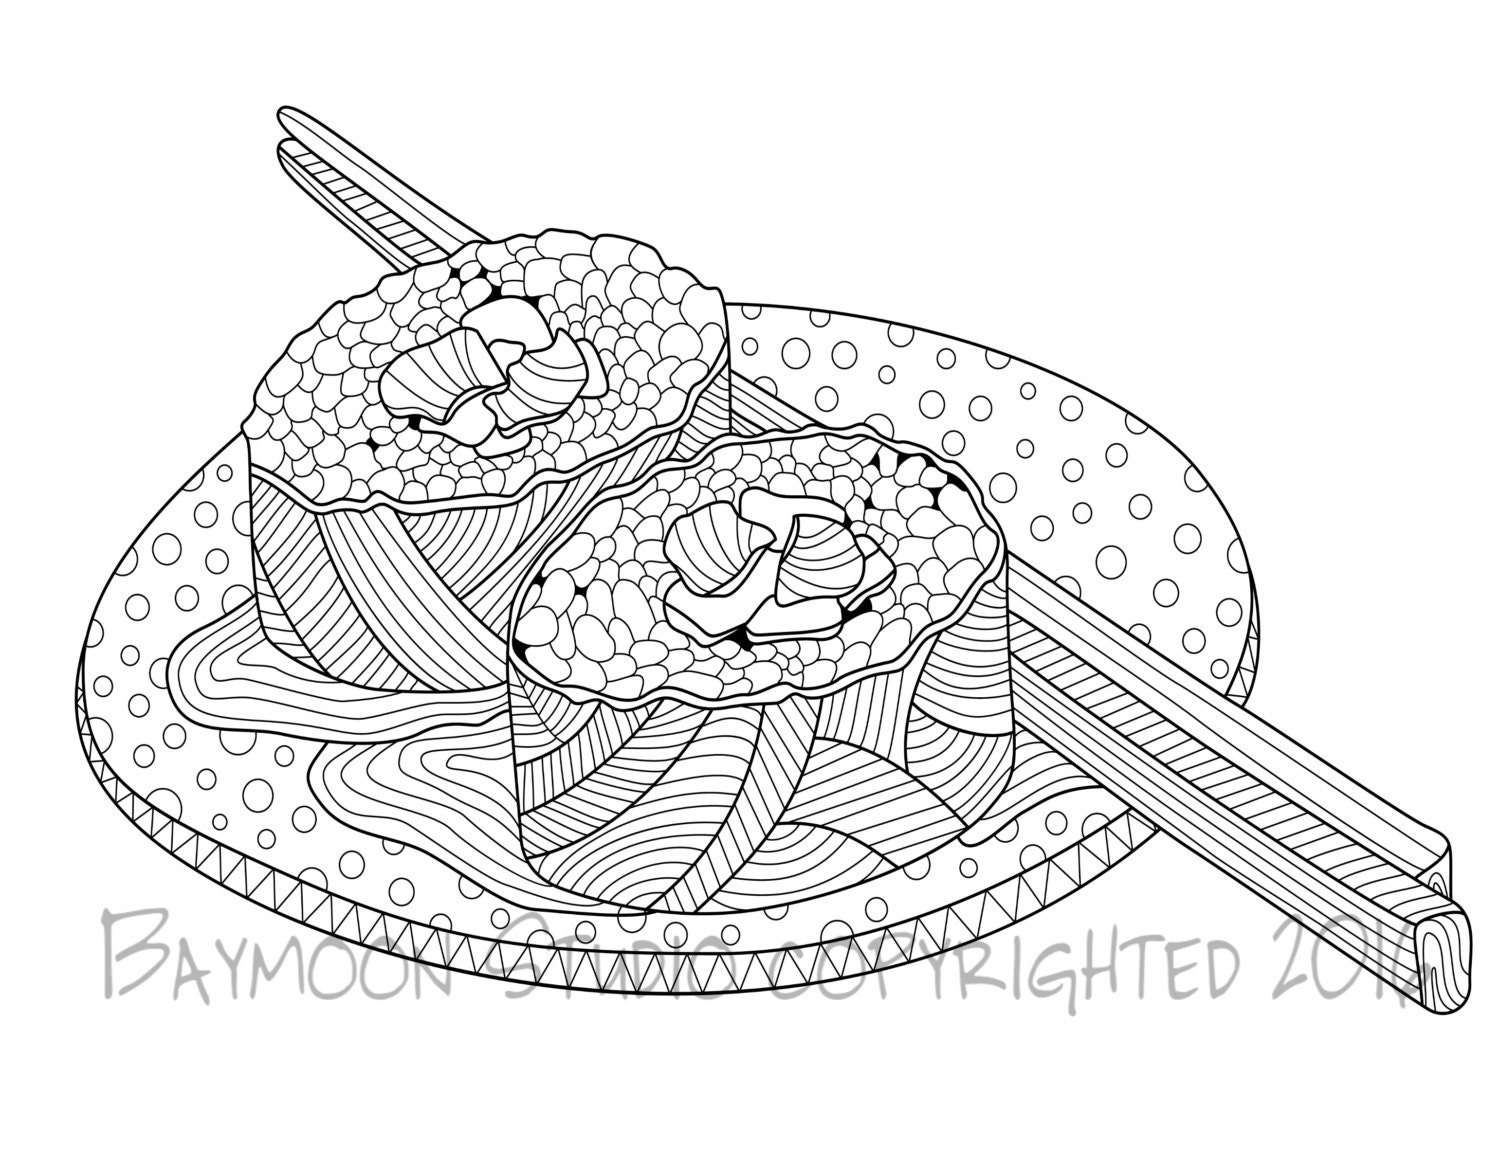 Download Sushi Coloring Page Printable Coloring Pages by BAYMOONSTUDIO